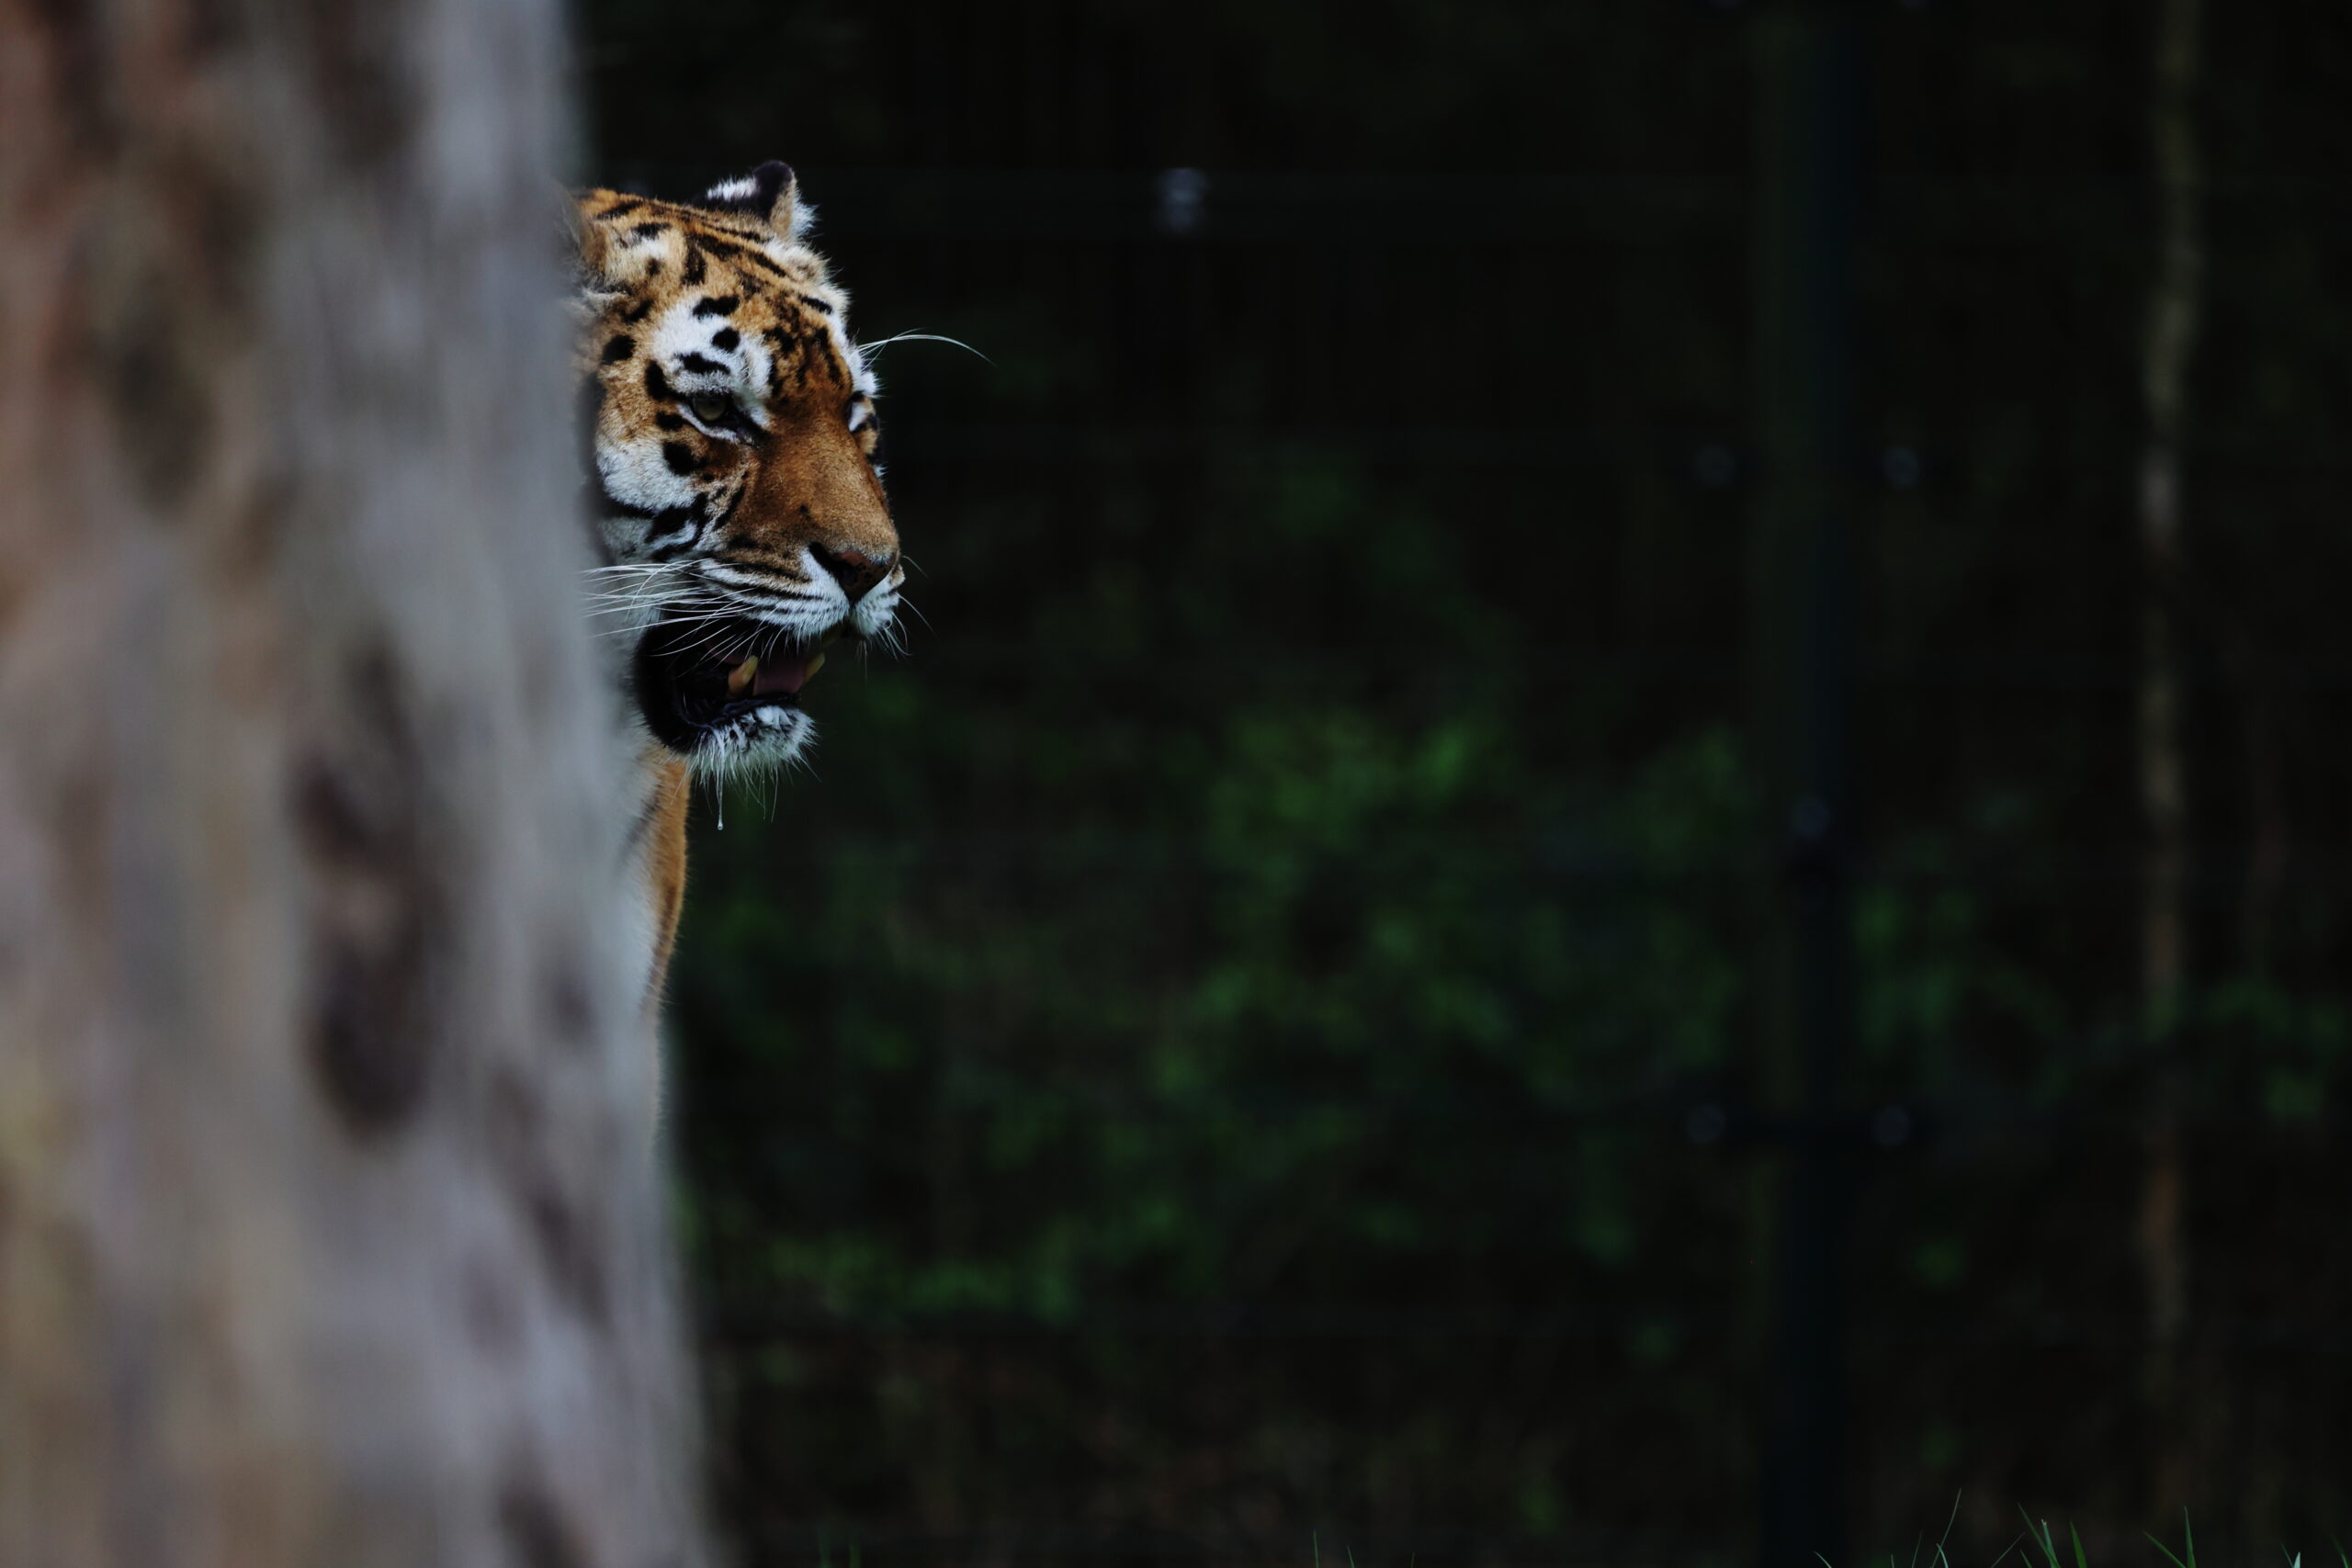 The Curious Beauty of Tigers: A Stunning Photo of a Tiger Peeking from Behind a Tree